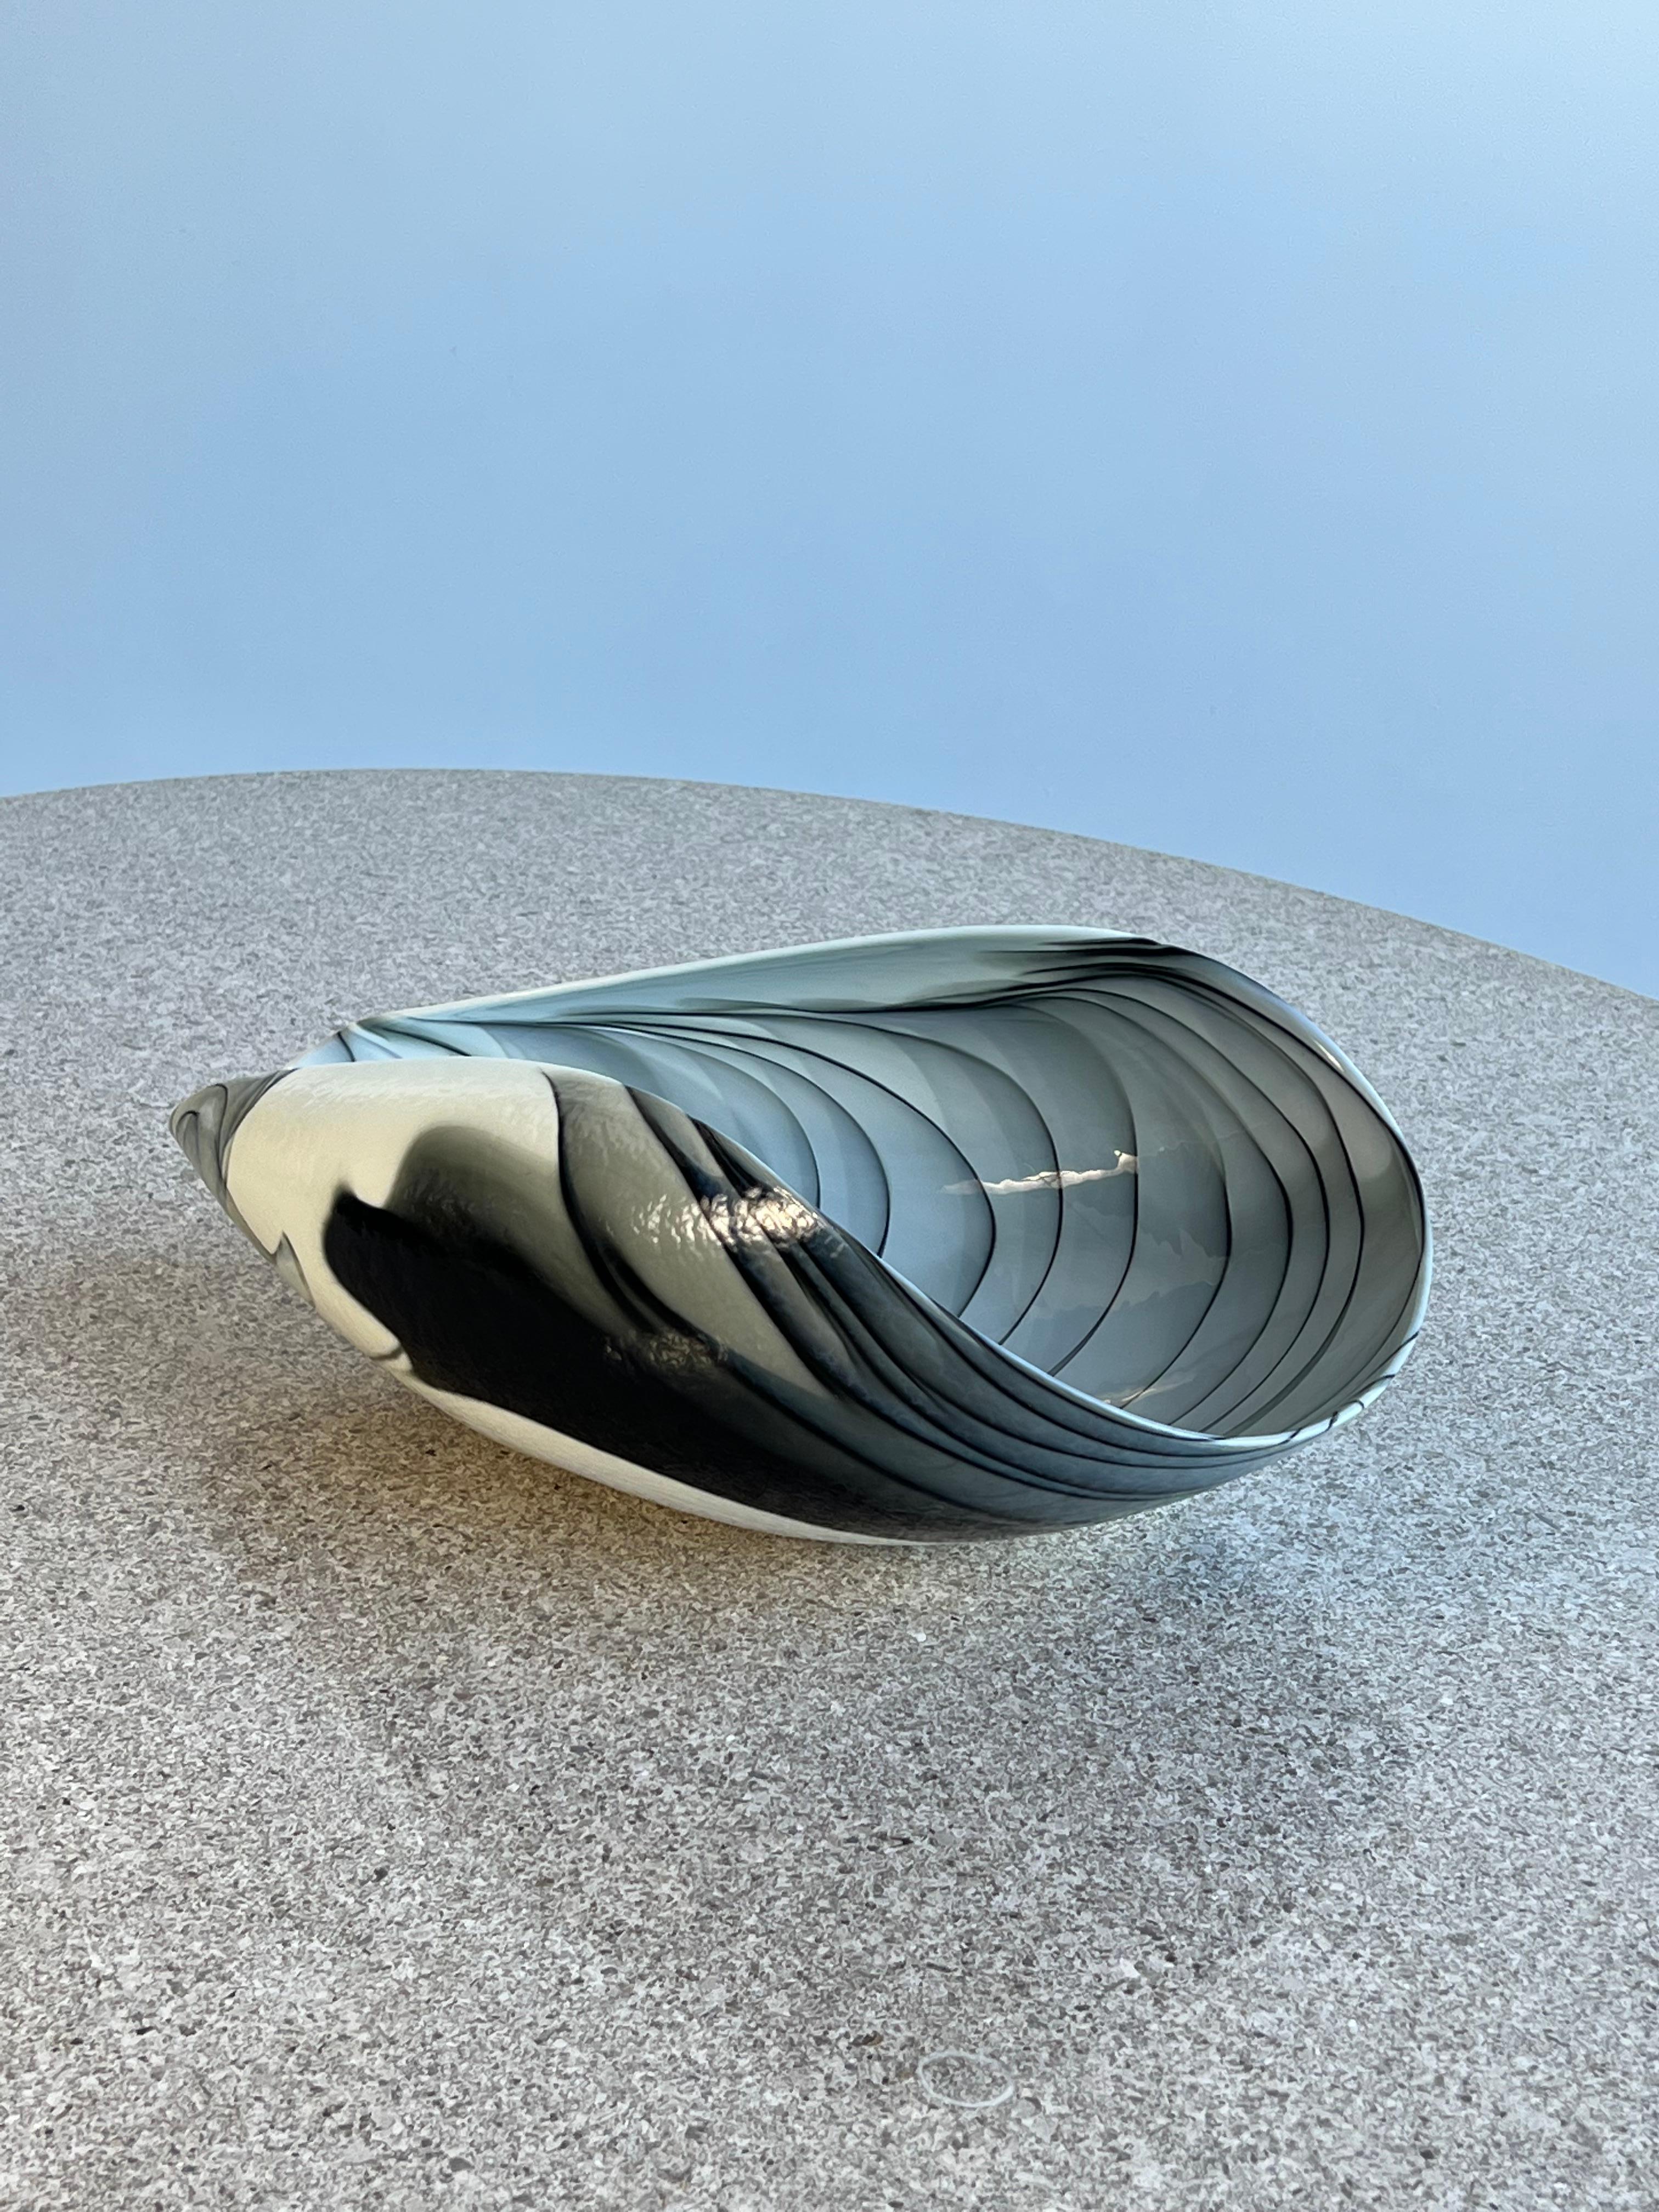 Astonishing creation by Vetro Artistico Murano, large design bowl in ivory and grey hues. This modern bowl revokes the sea and its elements, thanks to its elegant stripes that always gives unique result.